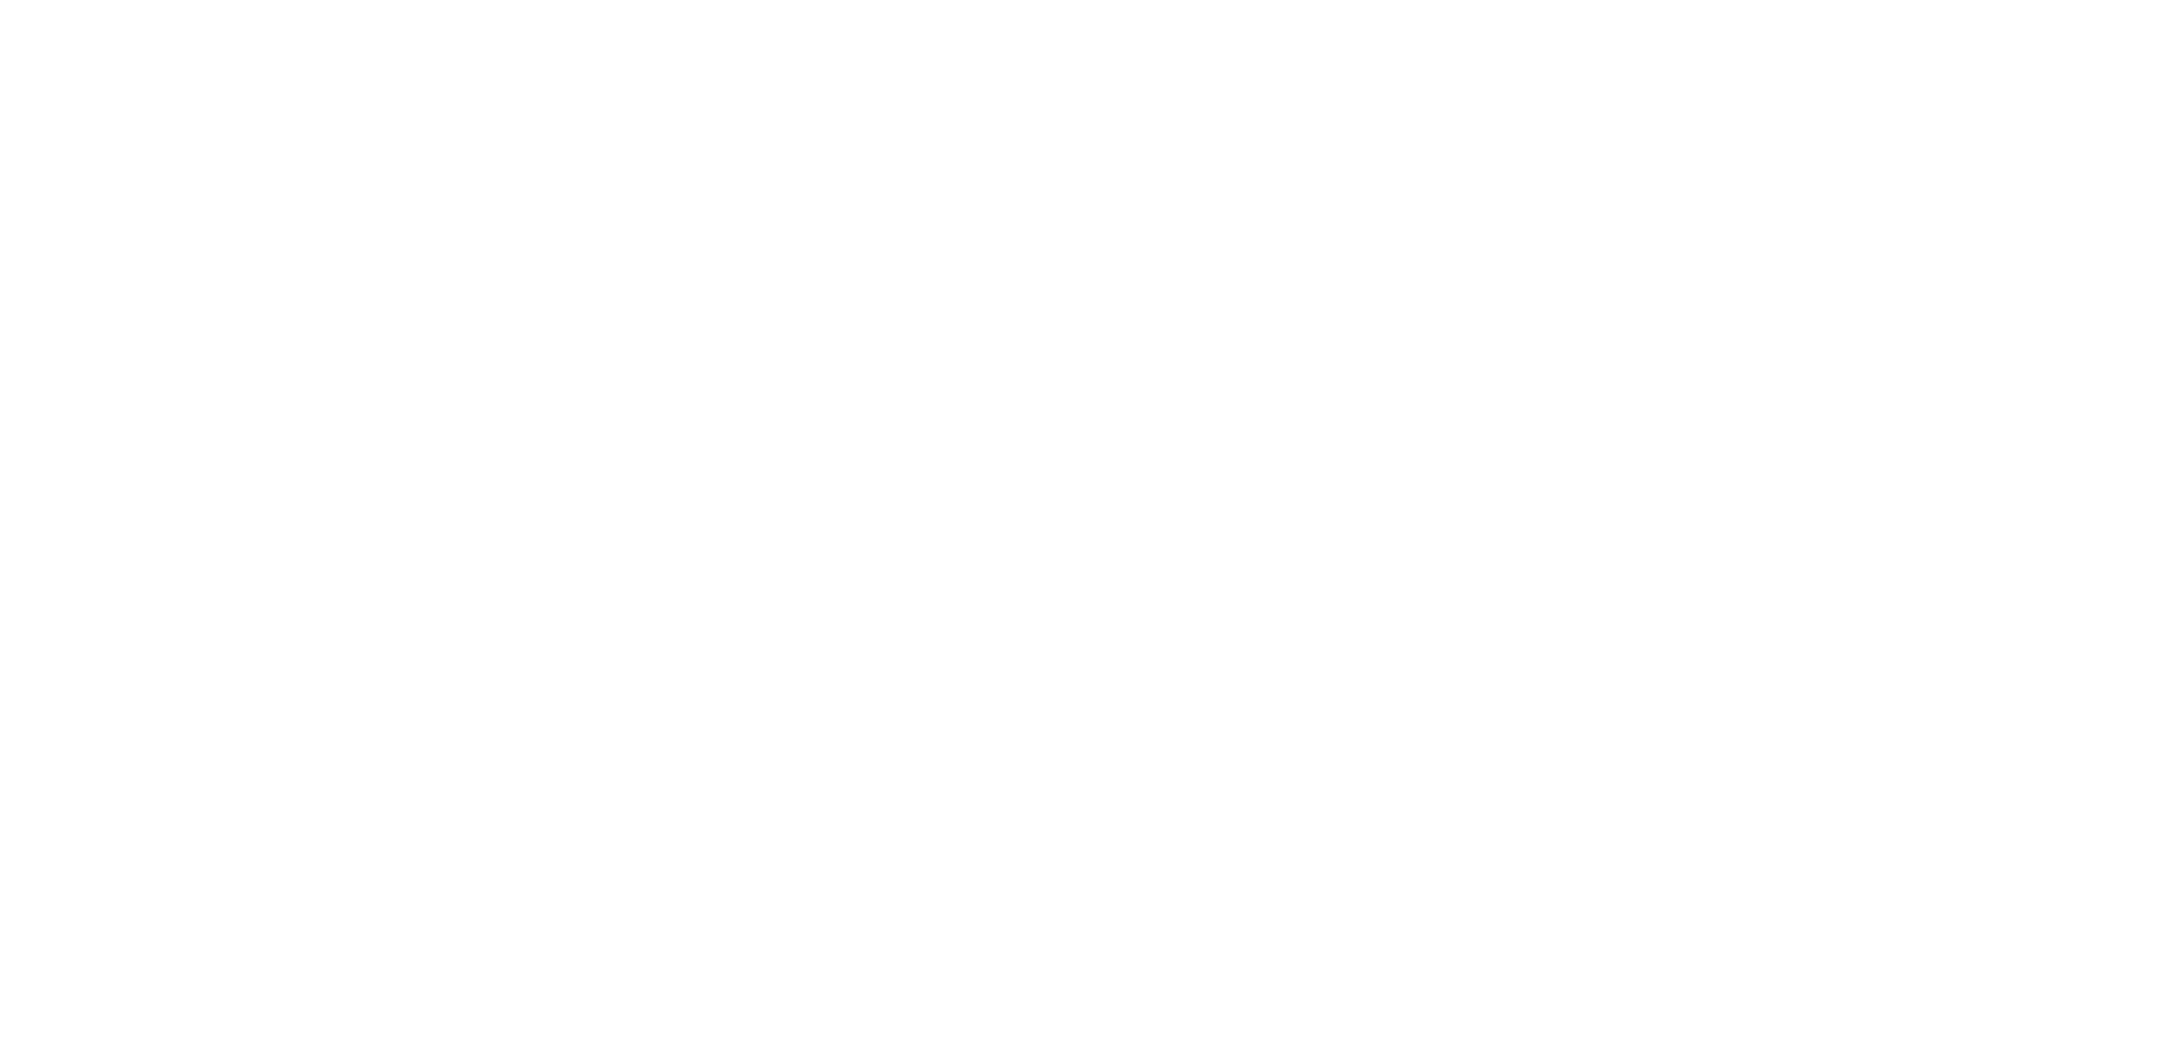 The Corky Canvas